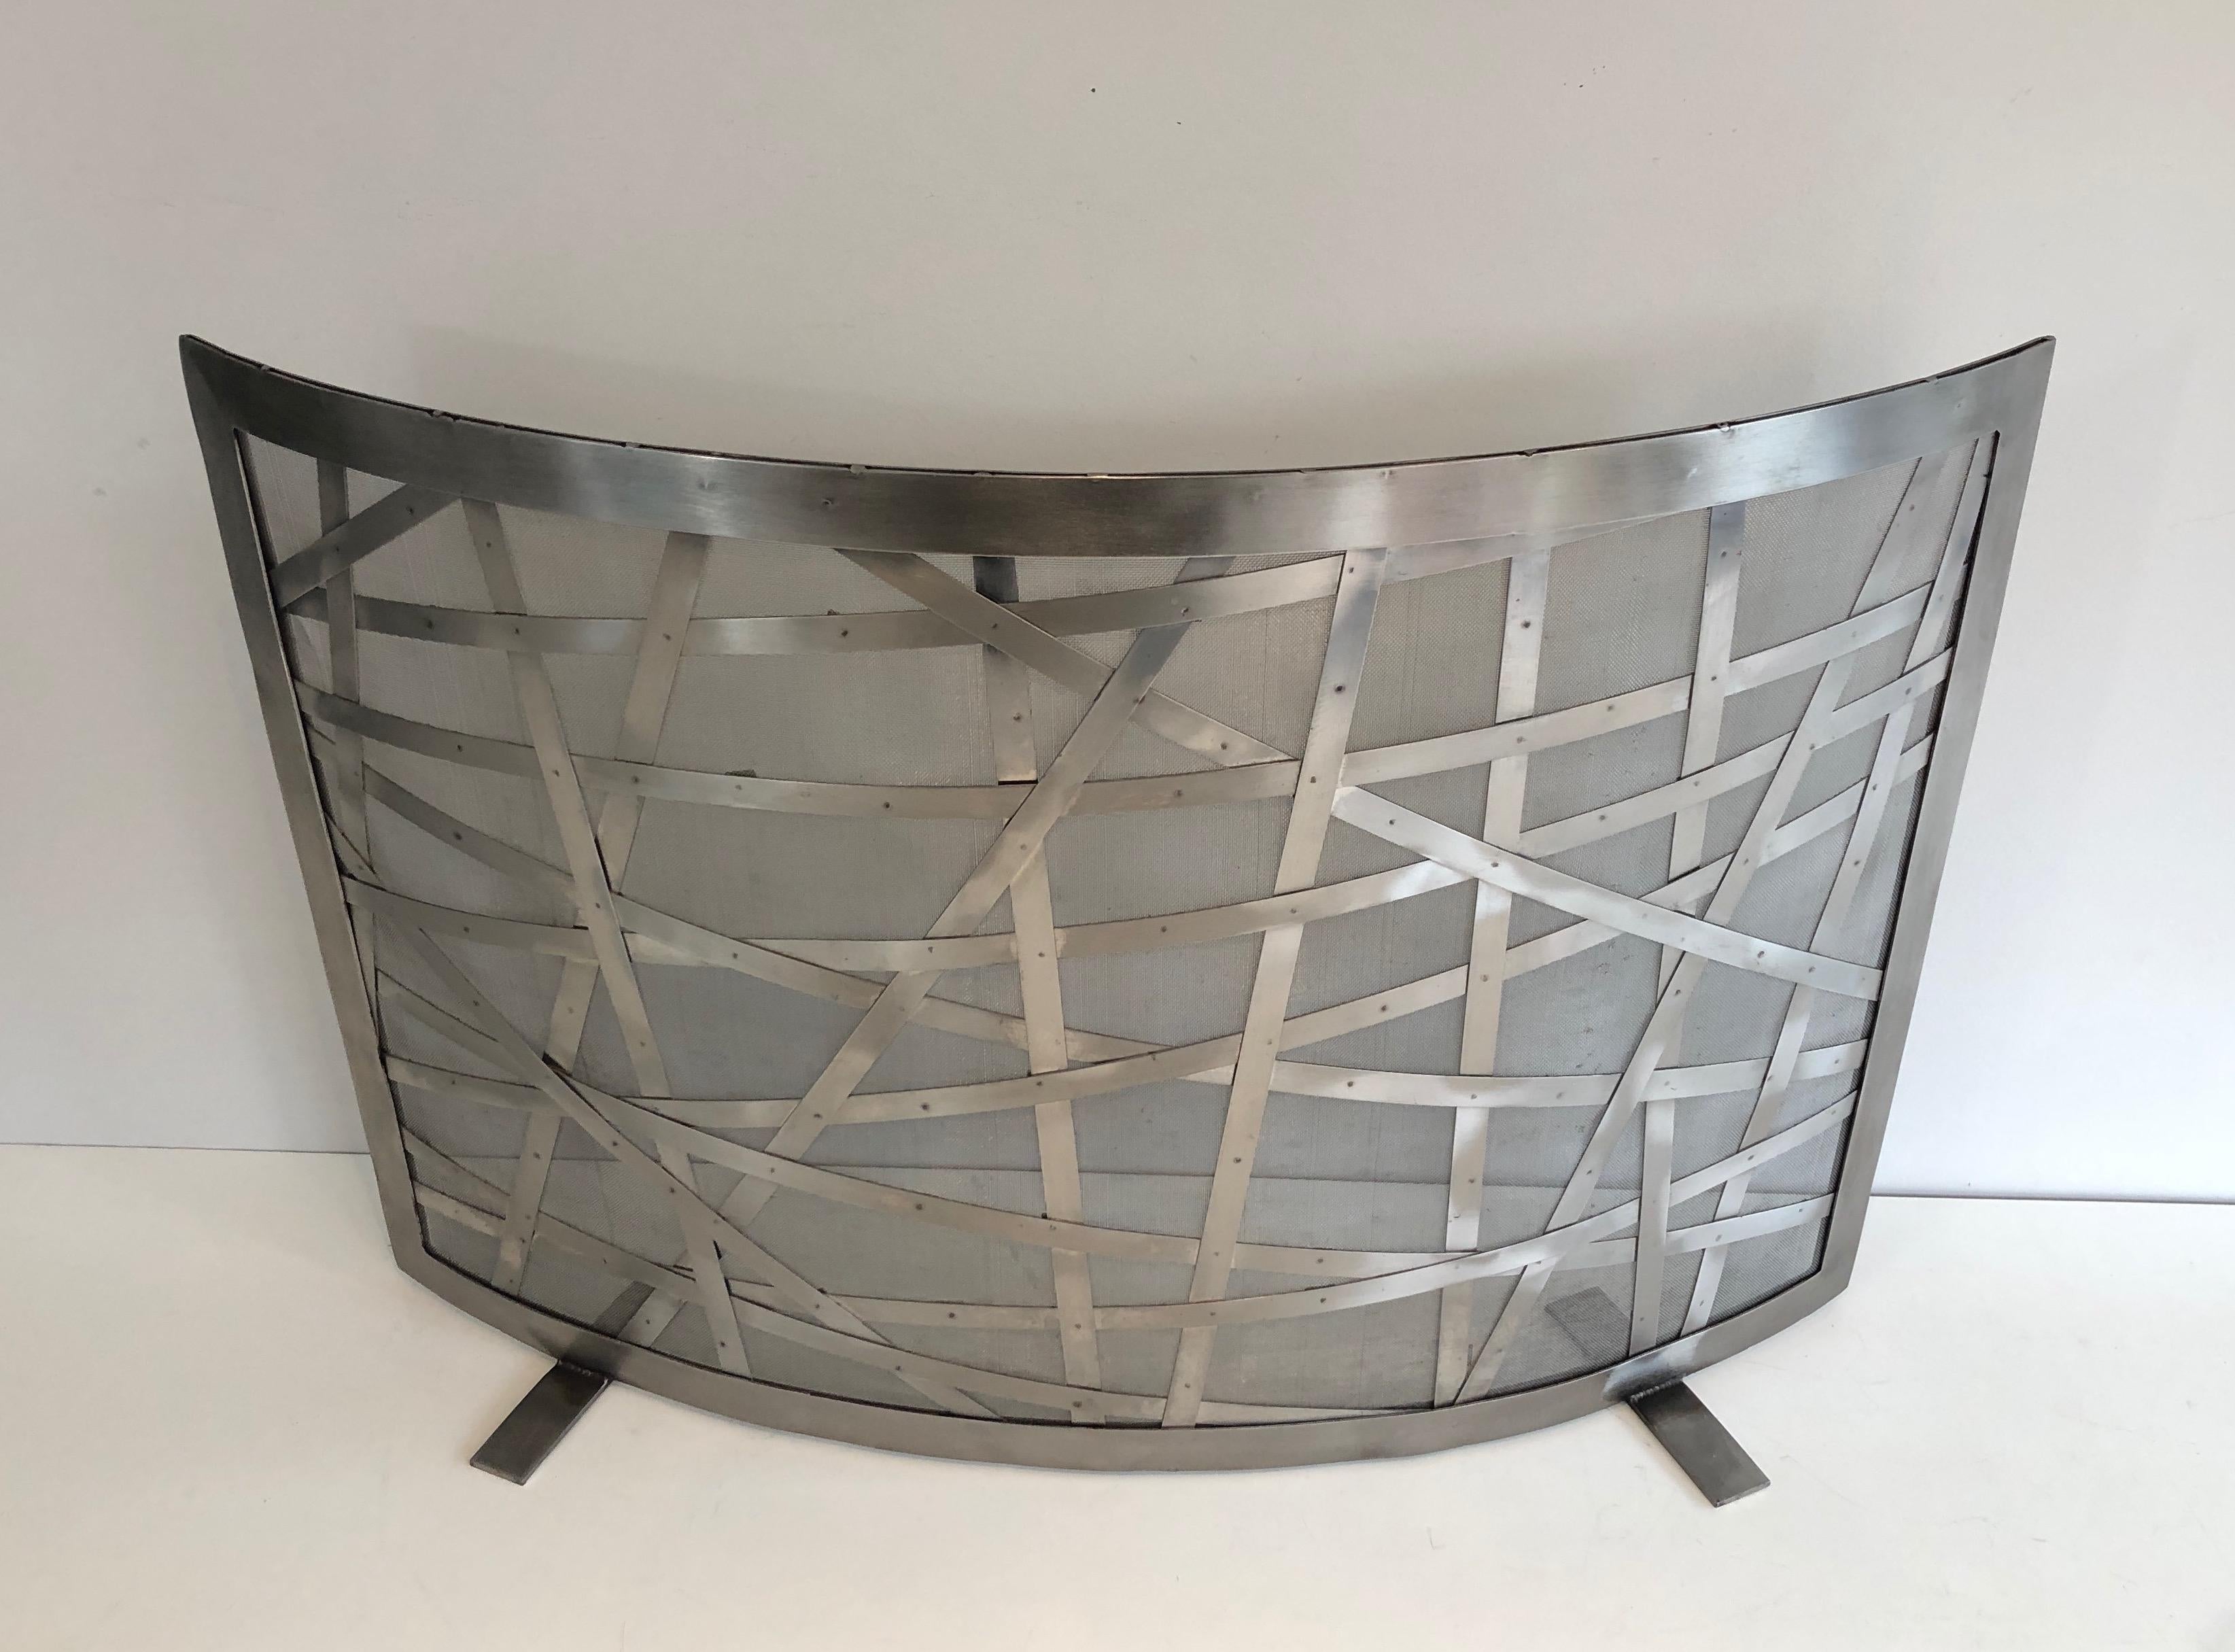 This design fire place screen is made of brushed steel. This is a unusual French design, circa 1970.